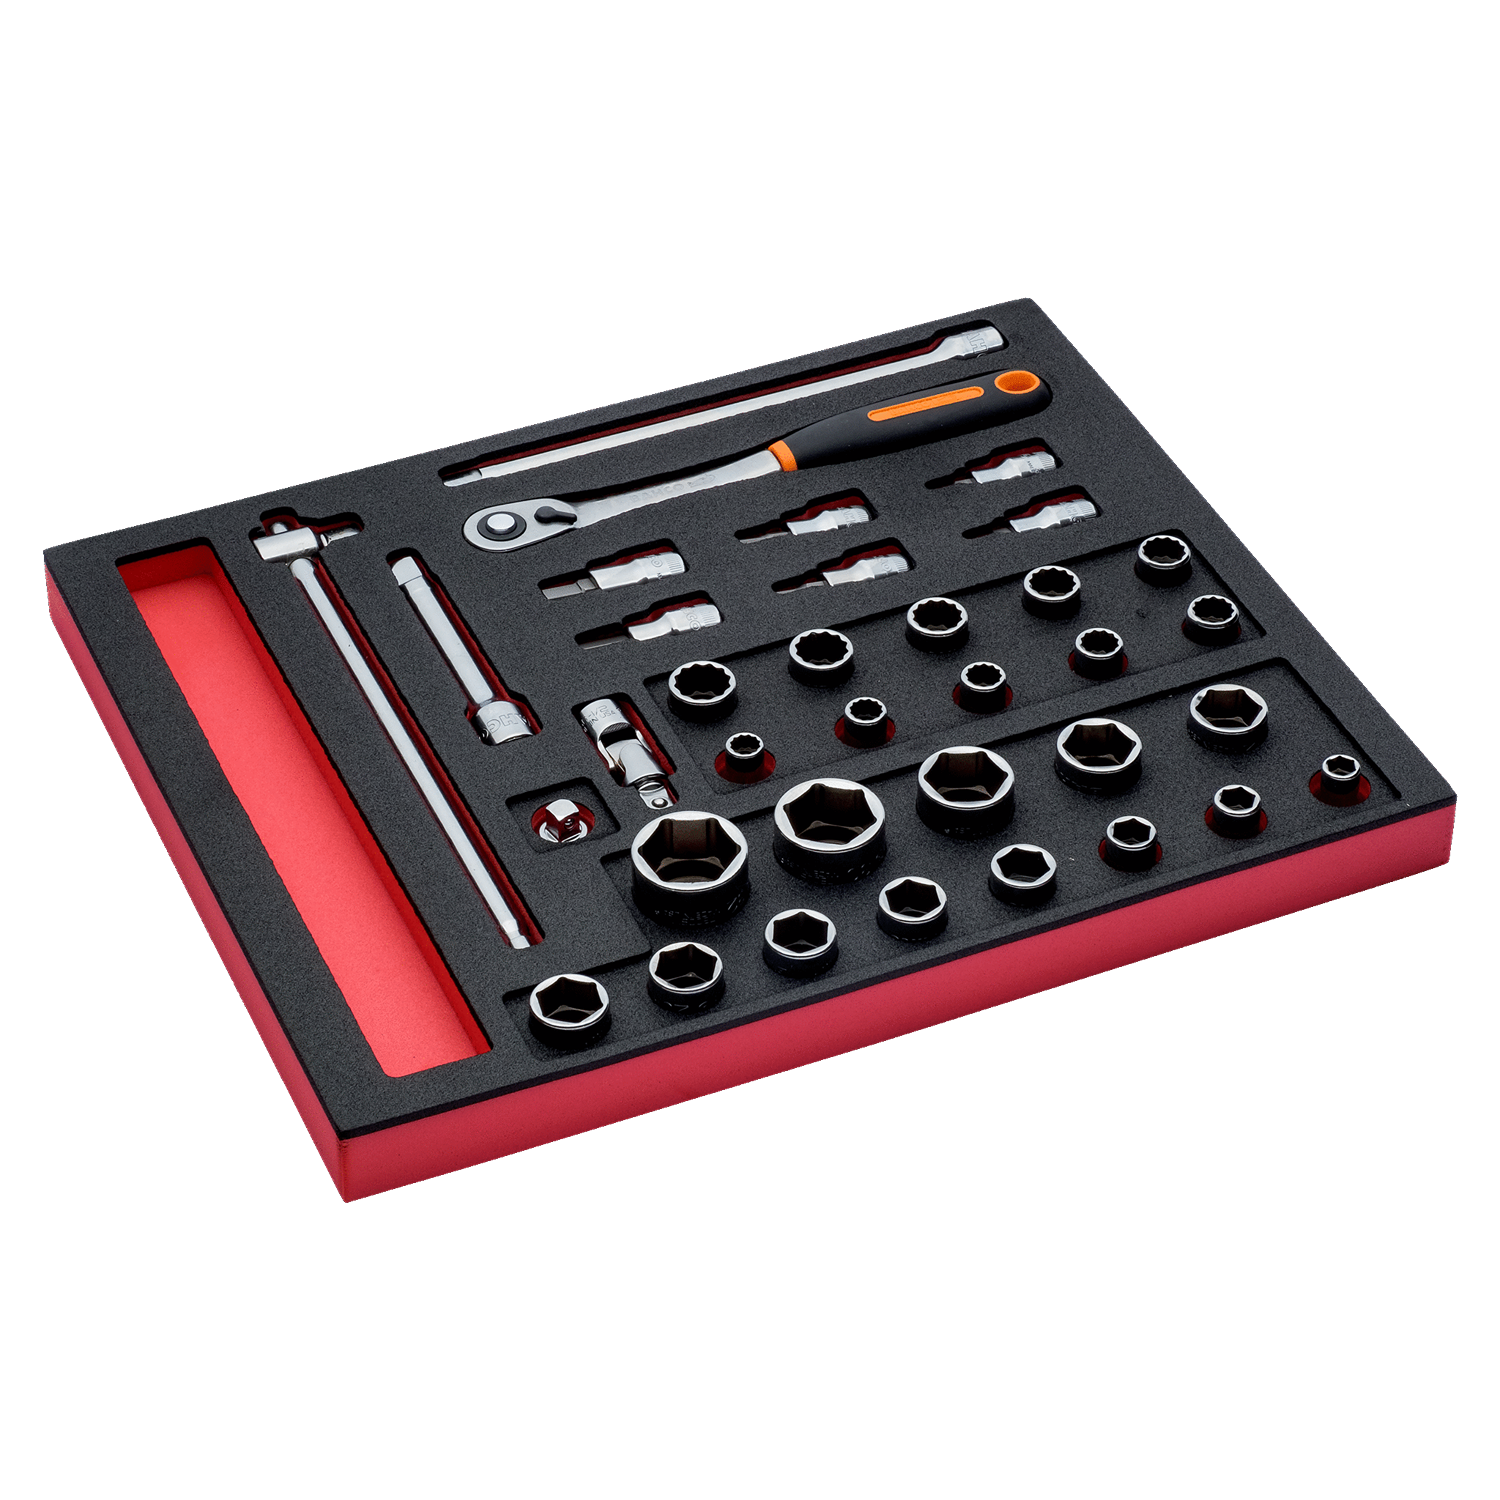 BAHCO FF1F2201 Fit&Go 2/3 Foam Inlay 1/2” Socket & Ratchet Set - Premium Ratchet Set from BAHCO - Shop now at Yew Aik.